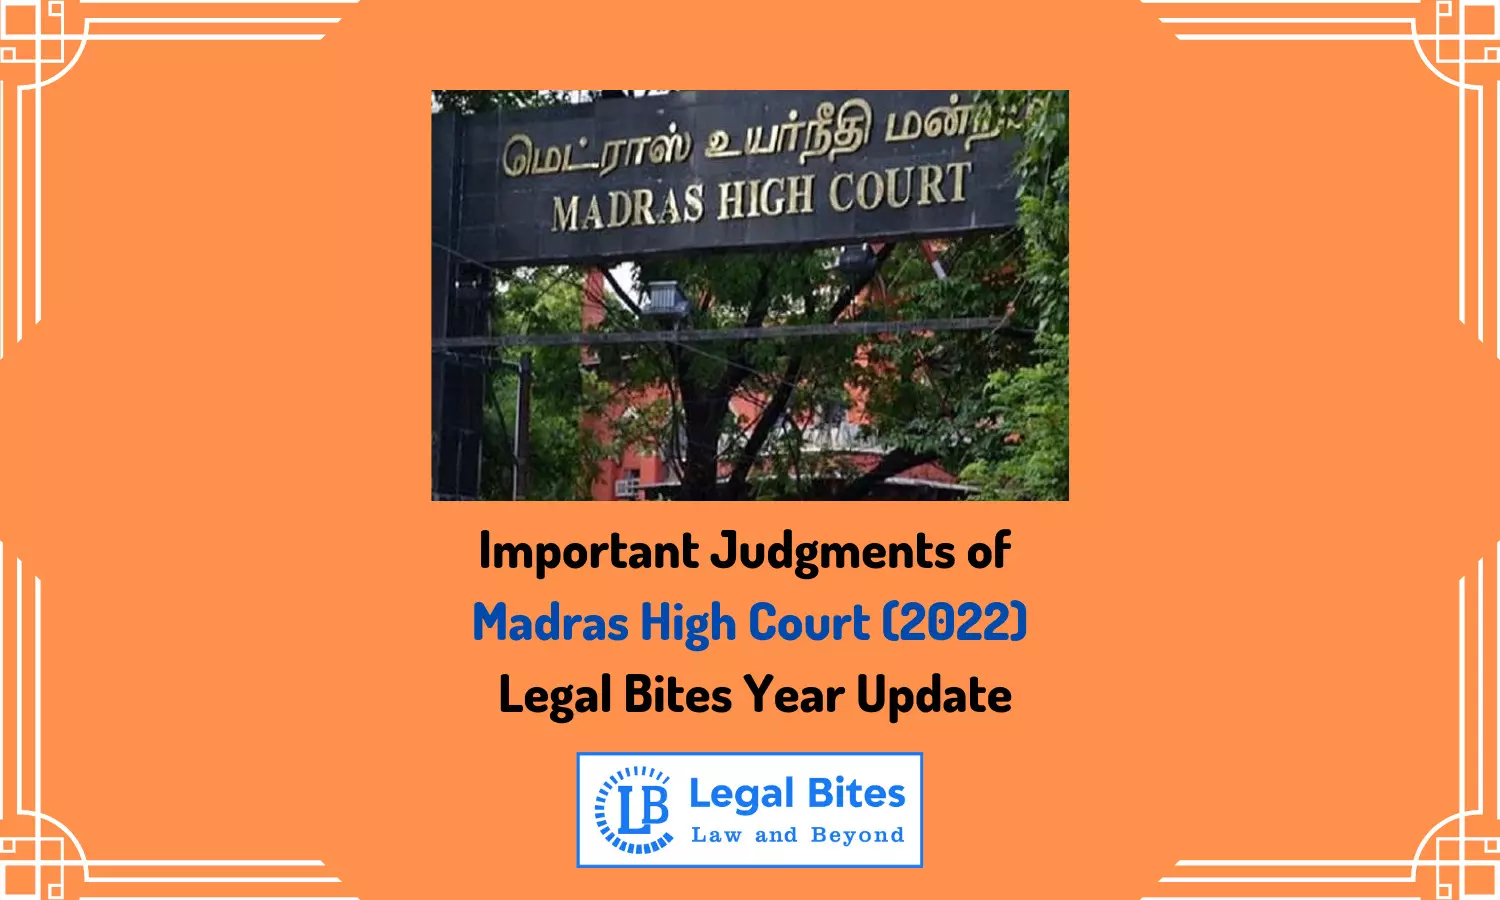 Important Judgments of Madras High Court (2022) - Legal Bites Year Update